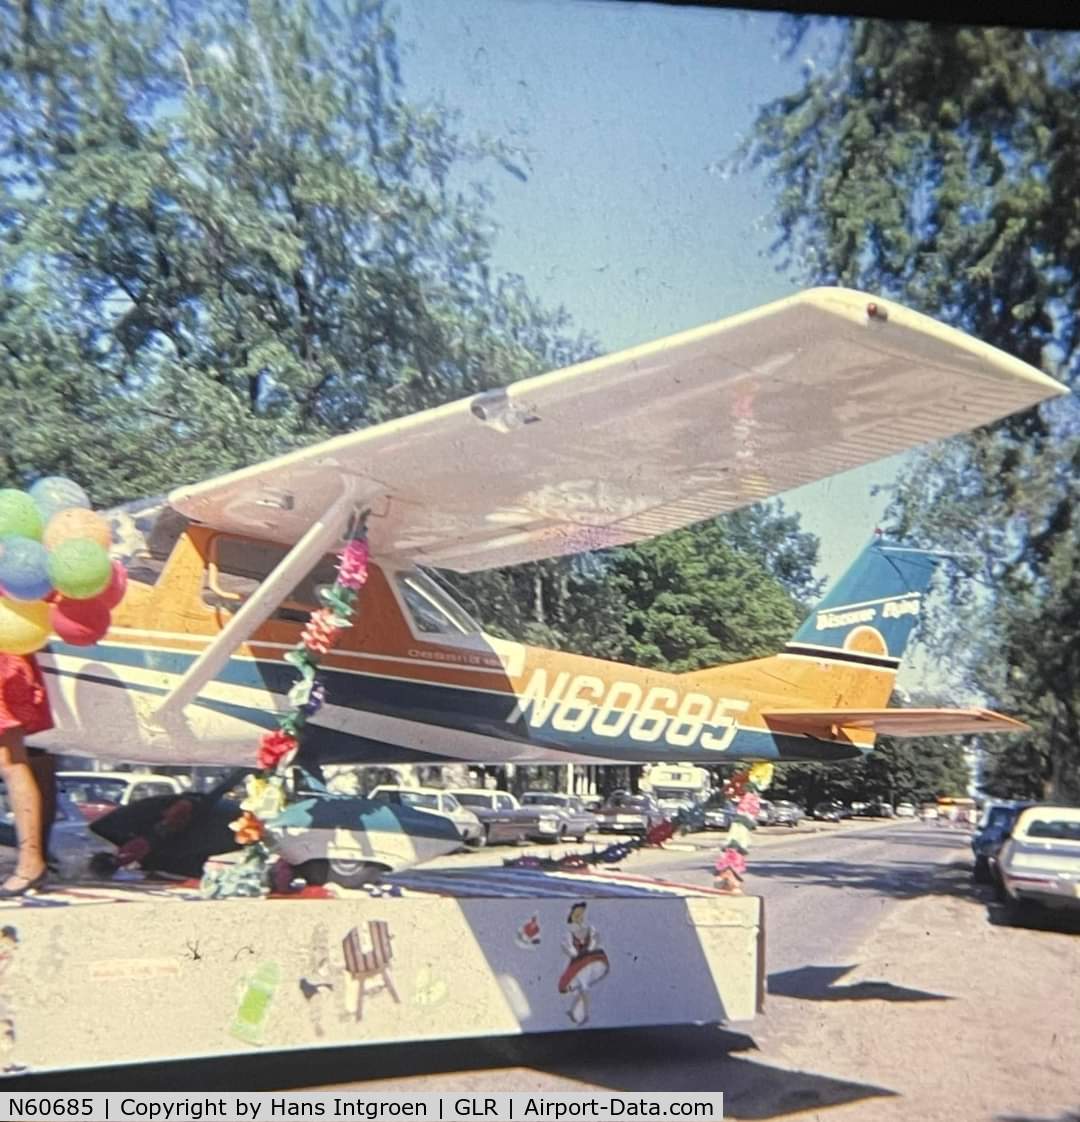 N60685, 1969 Cessna 150J C/N 15070500, As seen as a parade float in the 70s on Gaylord, Michigan.